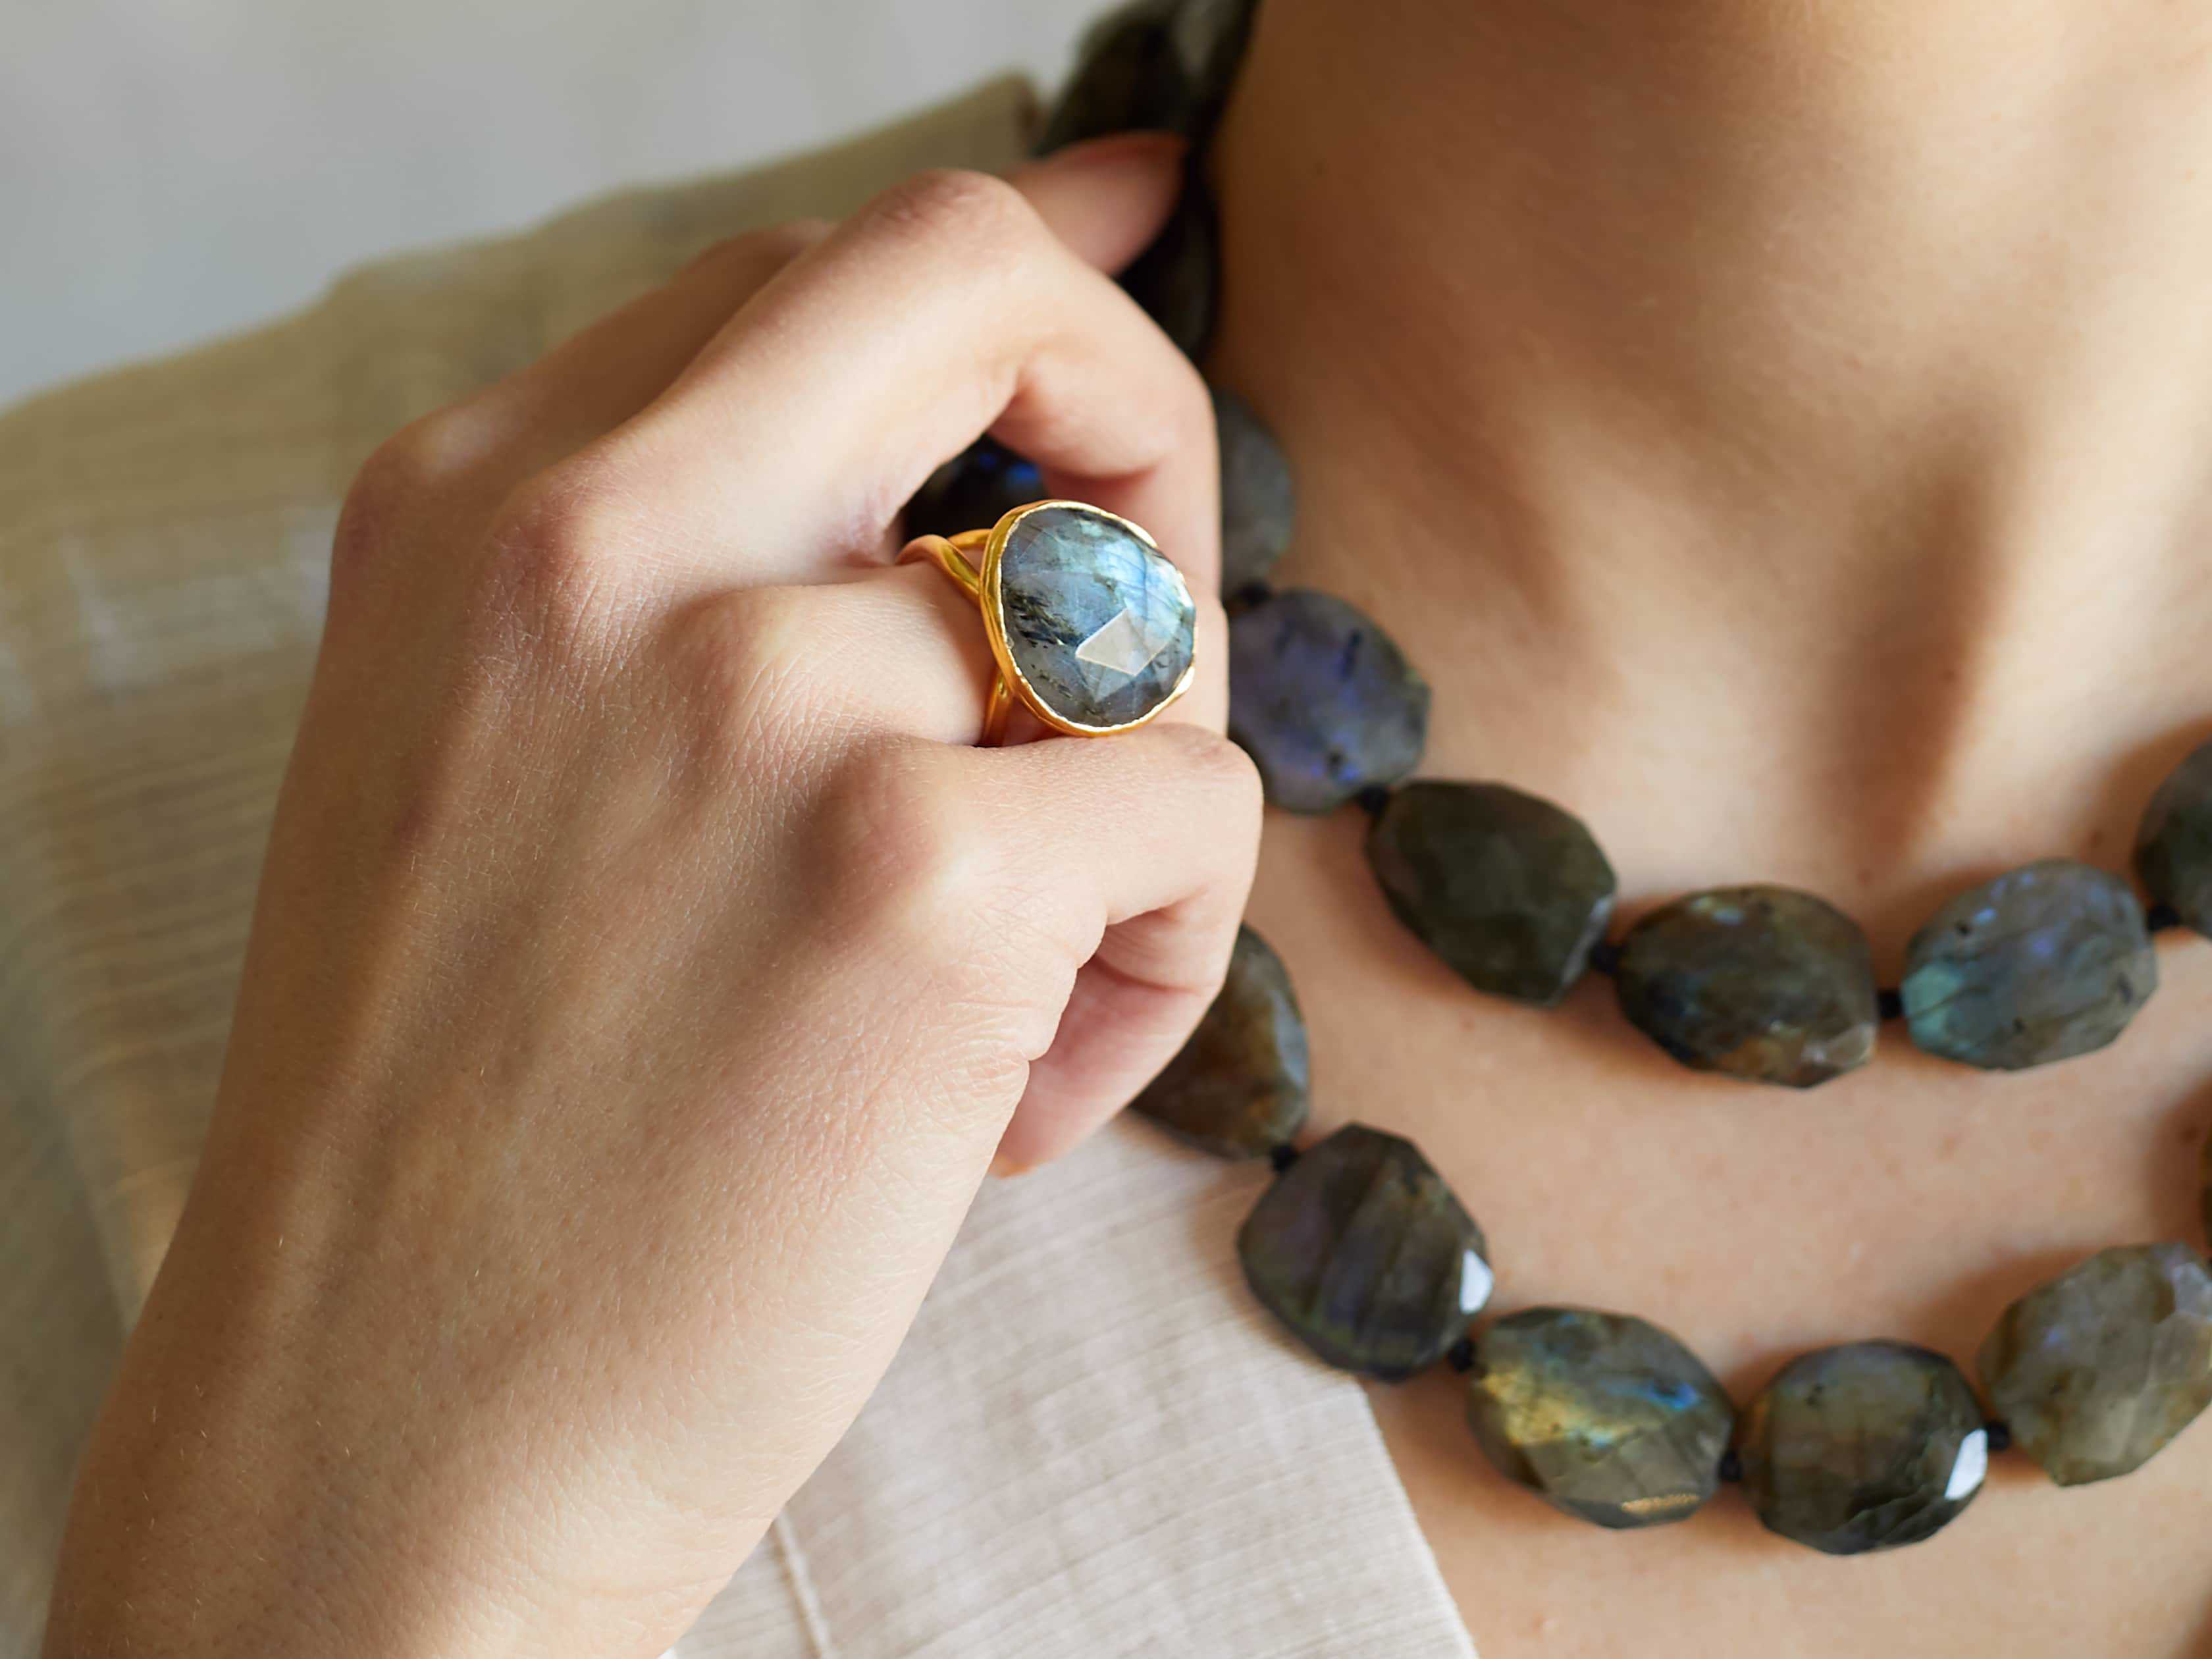 A labradorite ring on a woman's hand, along with multiple stone necklaces around her neck